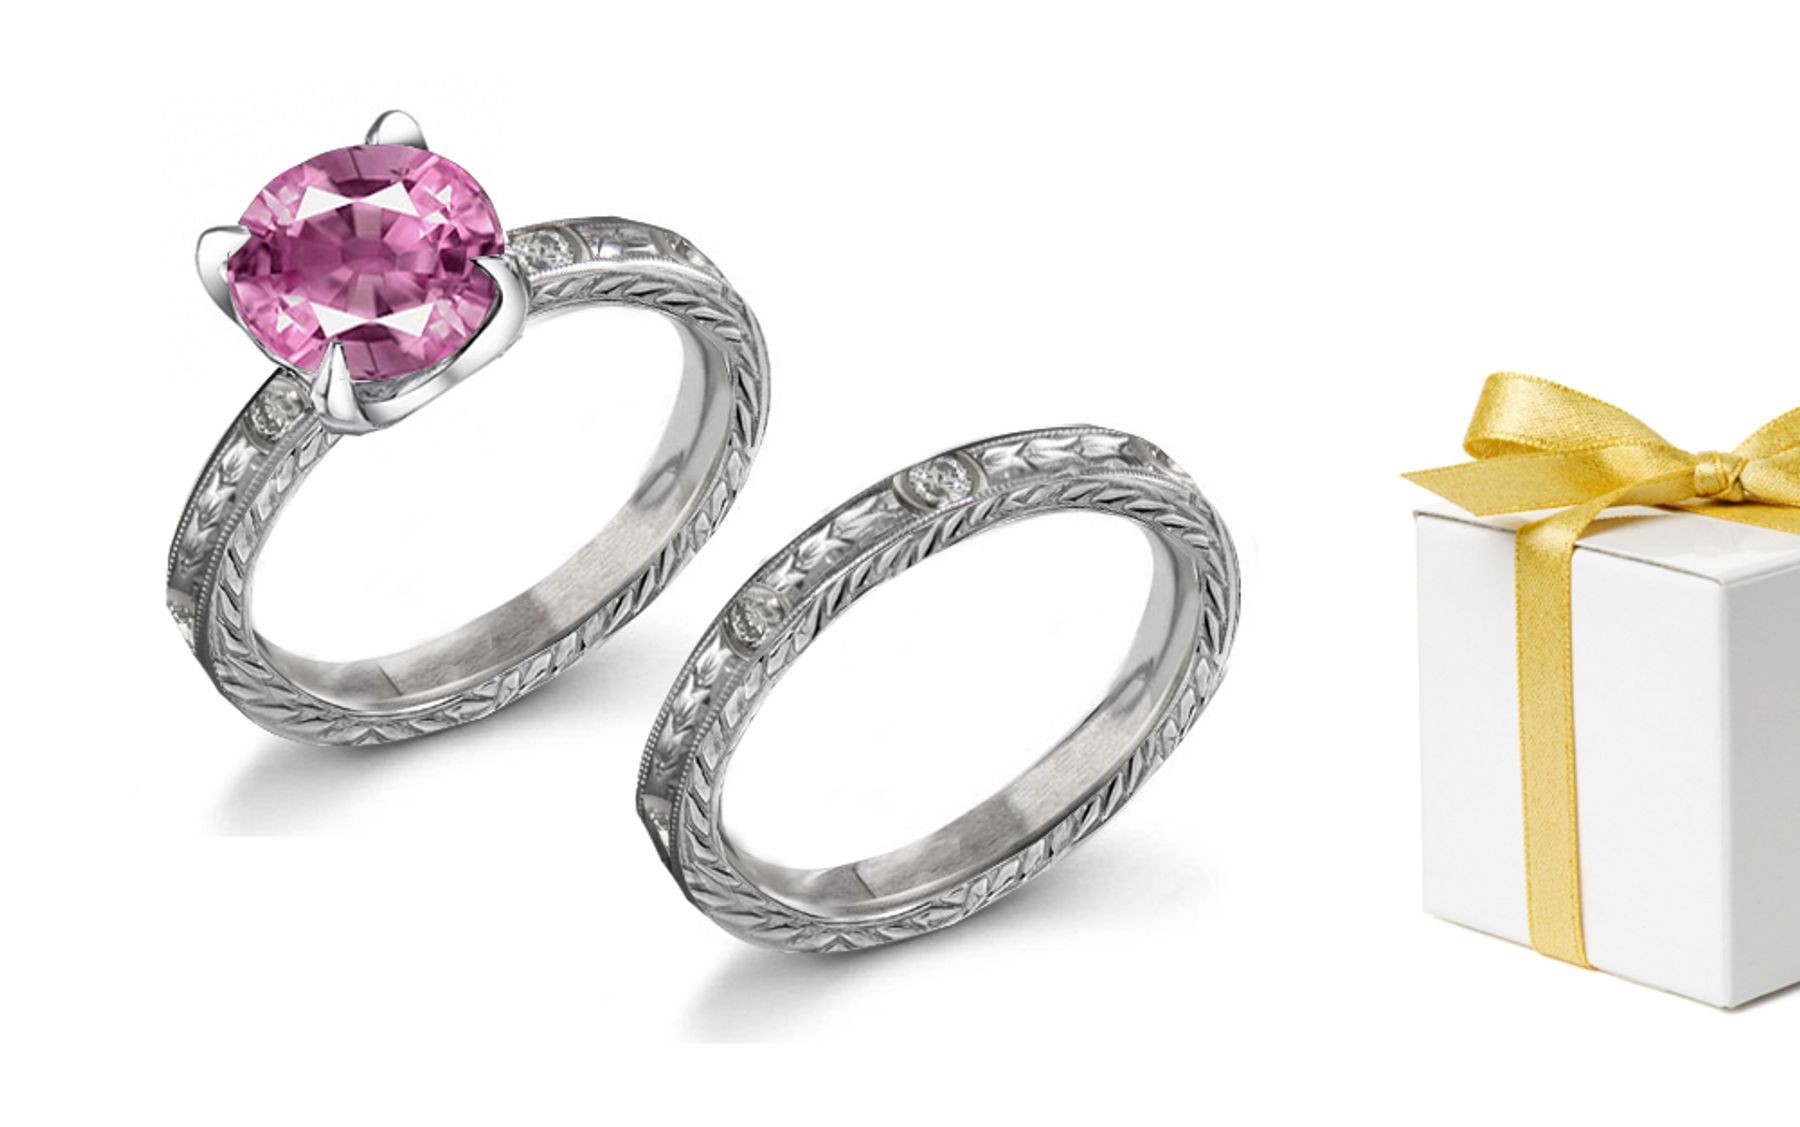 Love: Hand Engraved Pink Sapphire & Diamond Ring Click the Link to Purchase